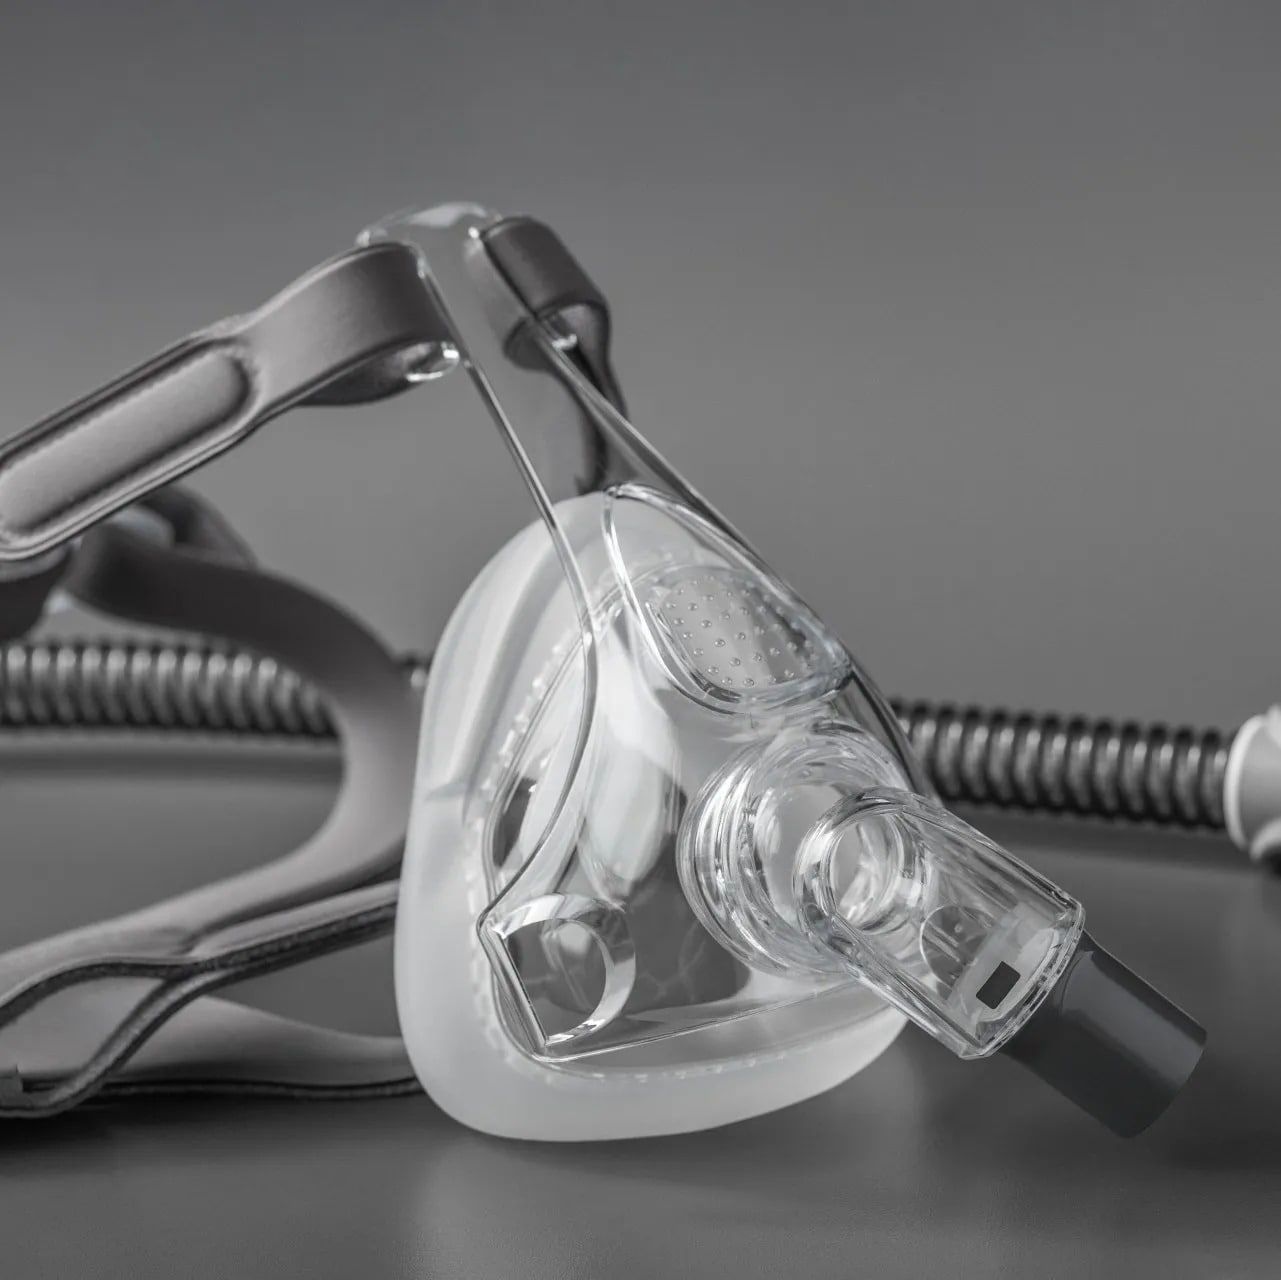 CPAP therapy for Sleep Apnea